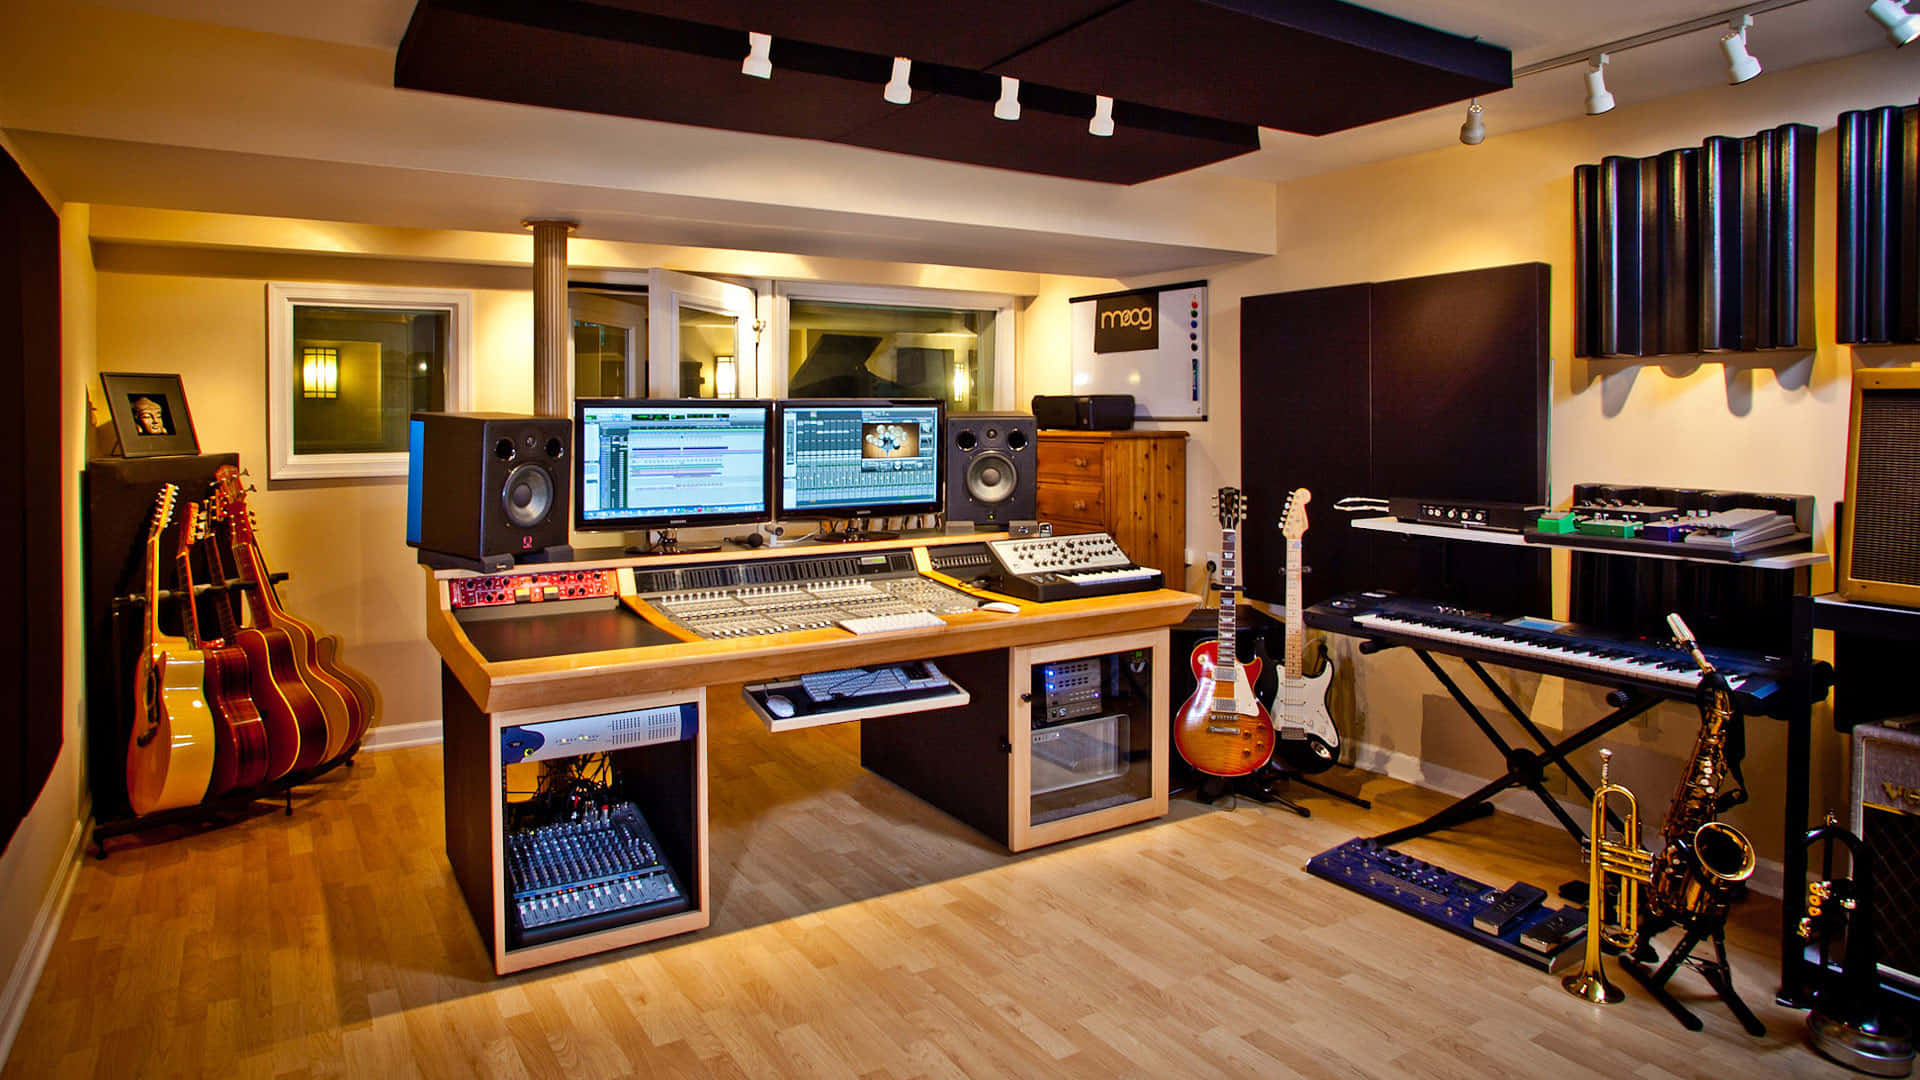 Find your inspiration in the studio.